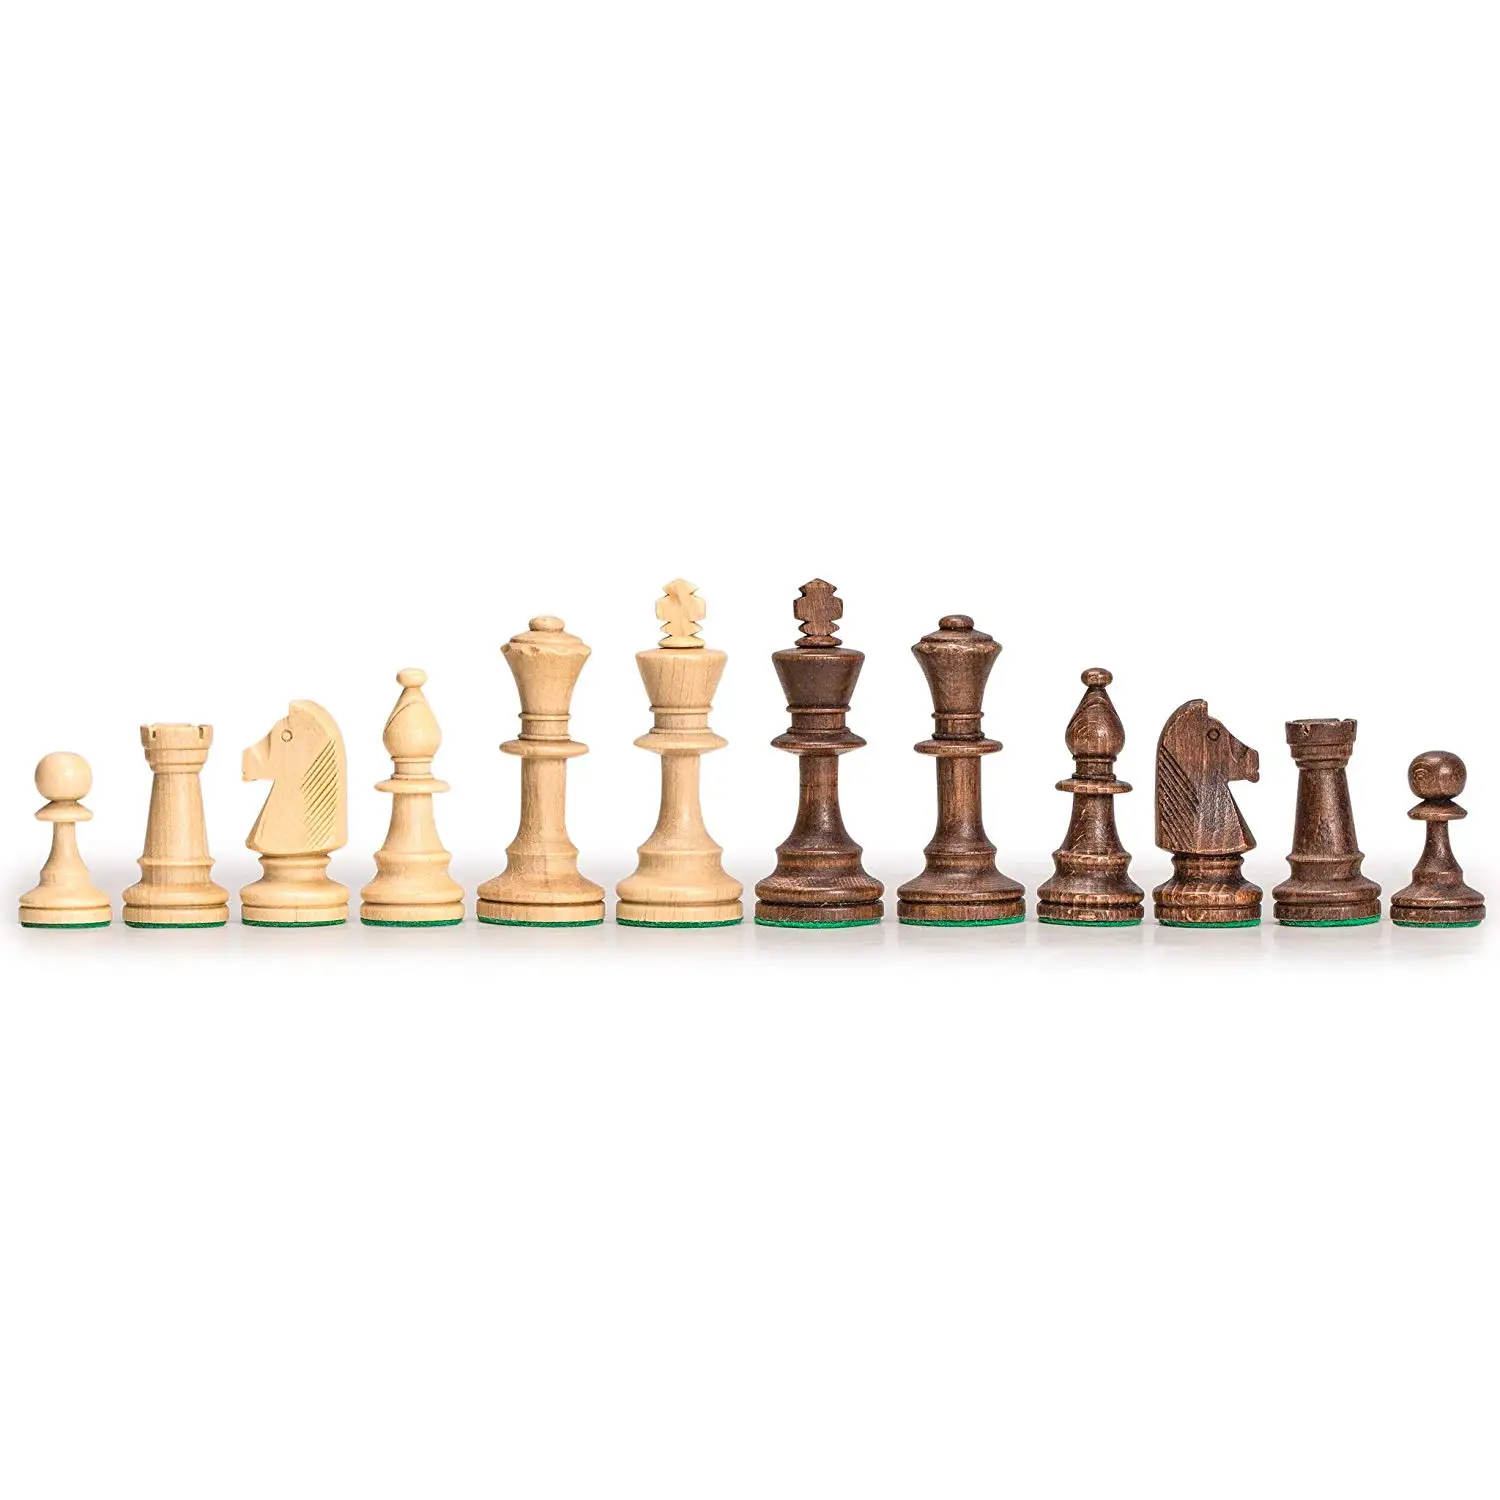 New Wooden International Chess Set 32 Pieces 6 Different Size Available 2 Colour 